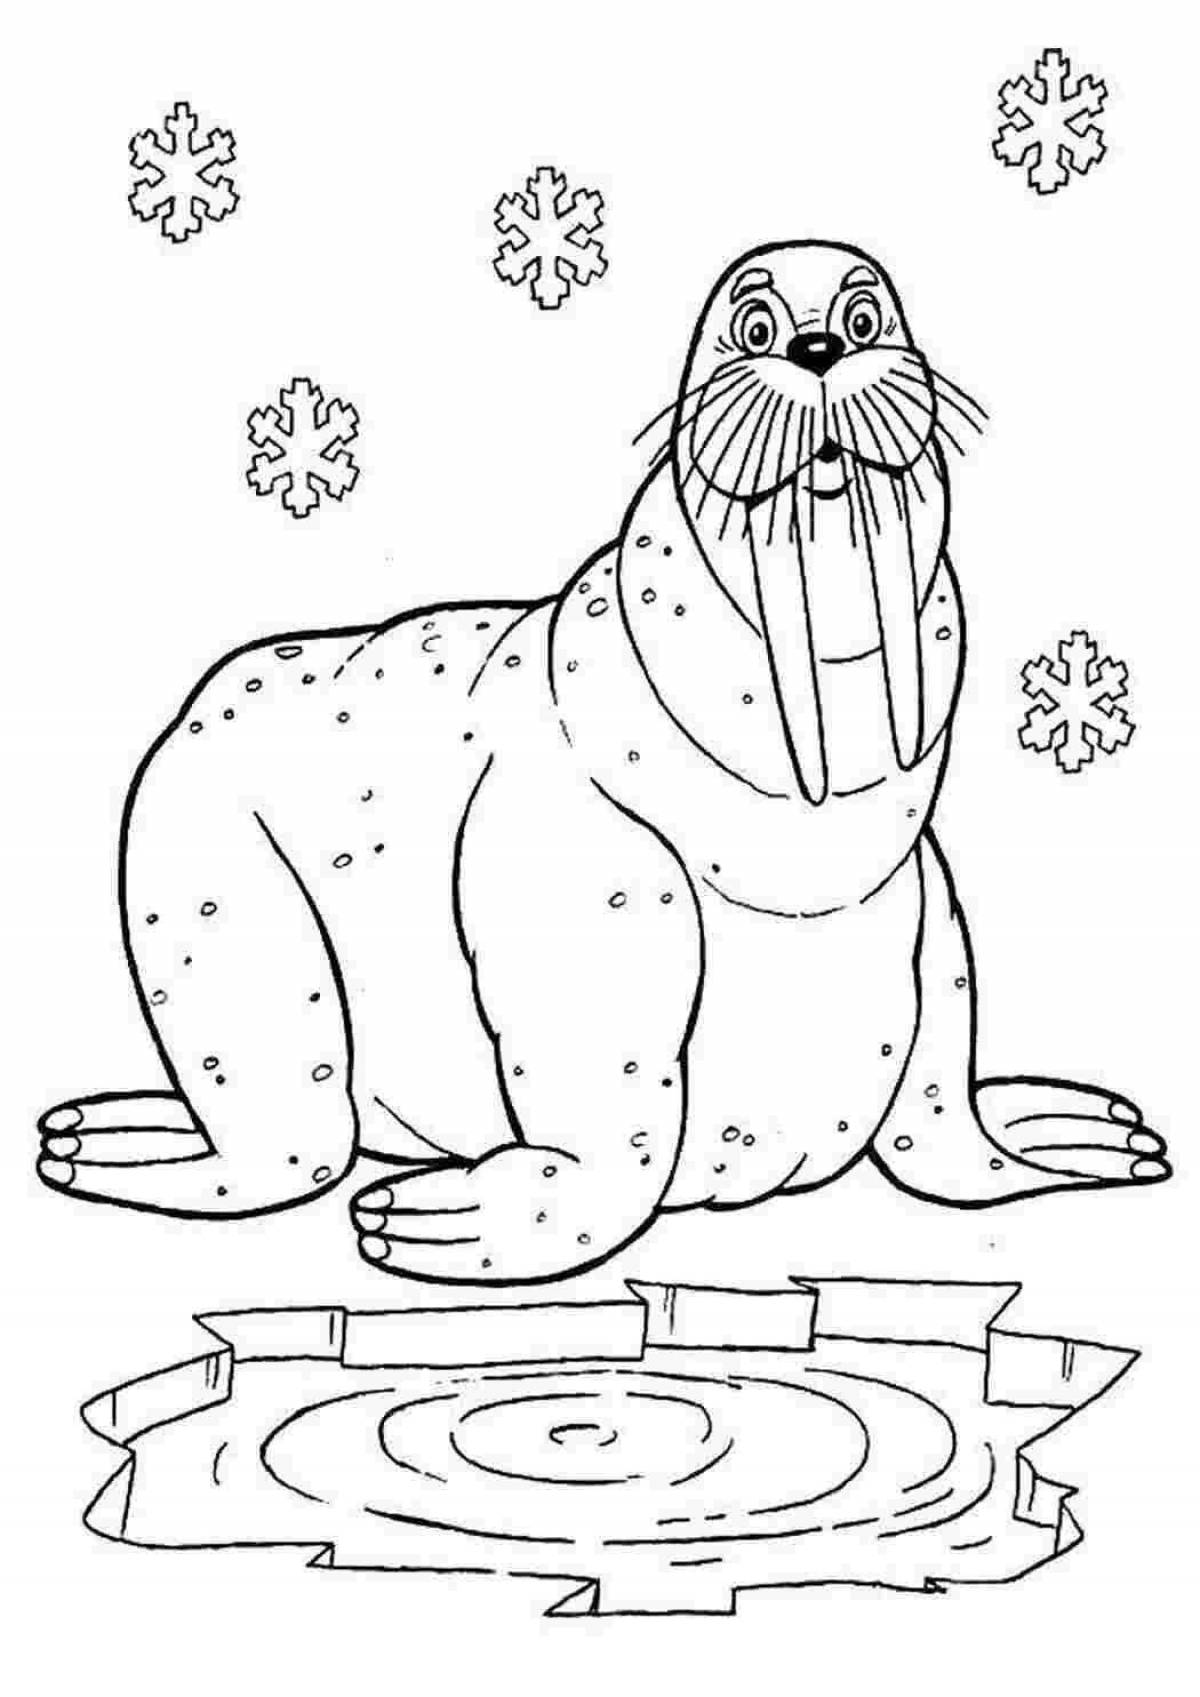 Animals of the north for preschoolers #4